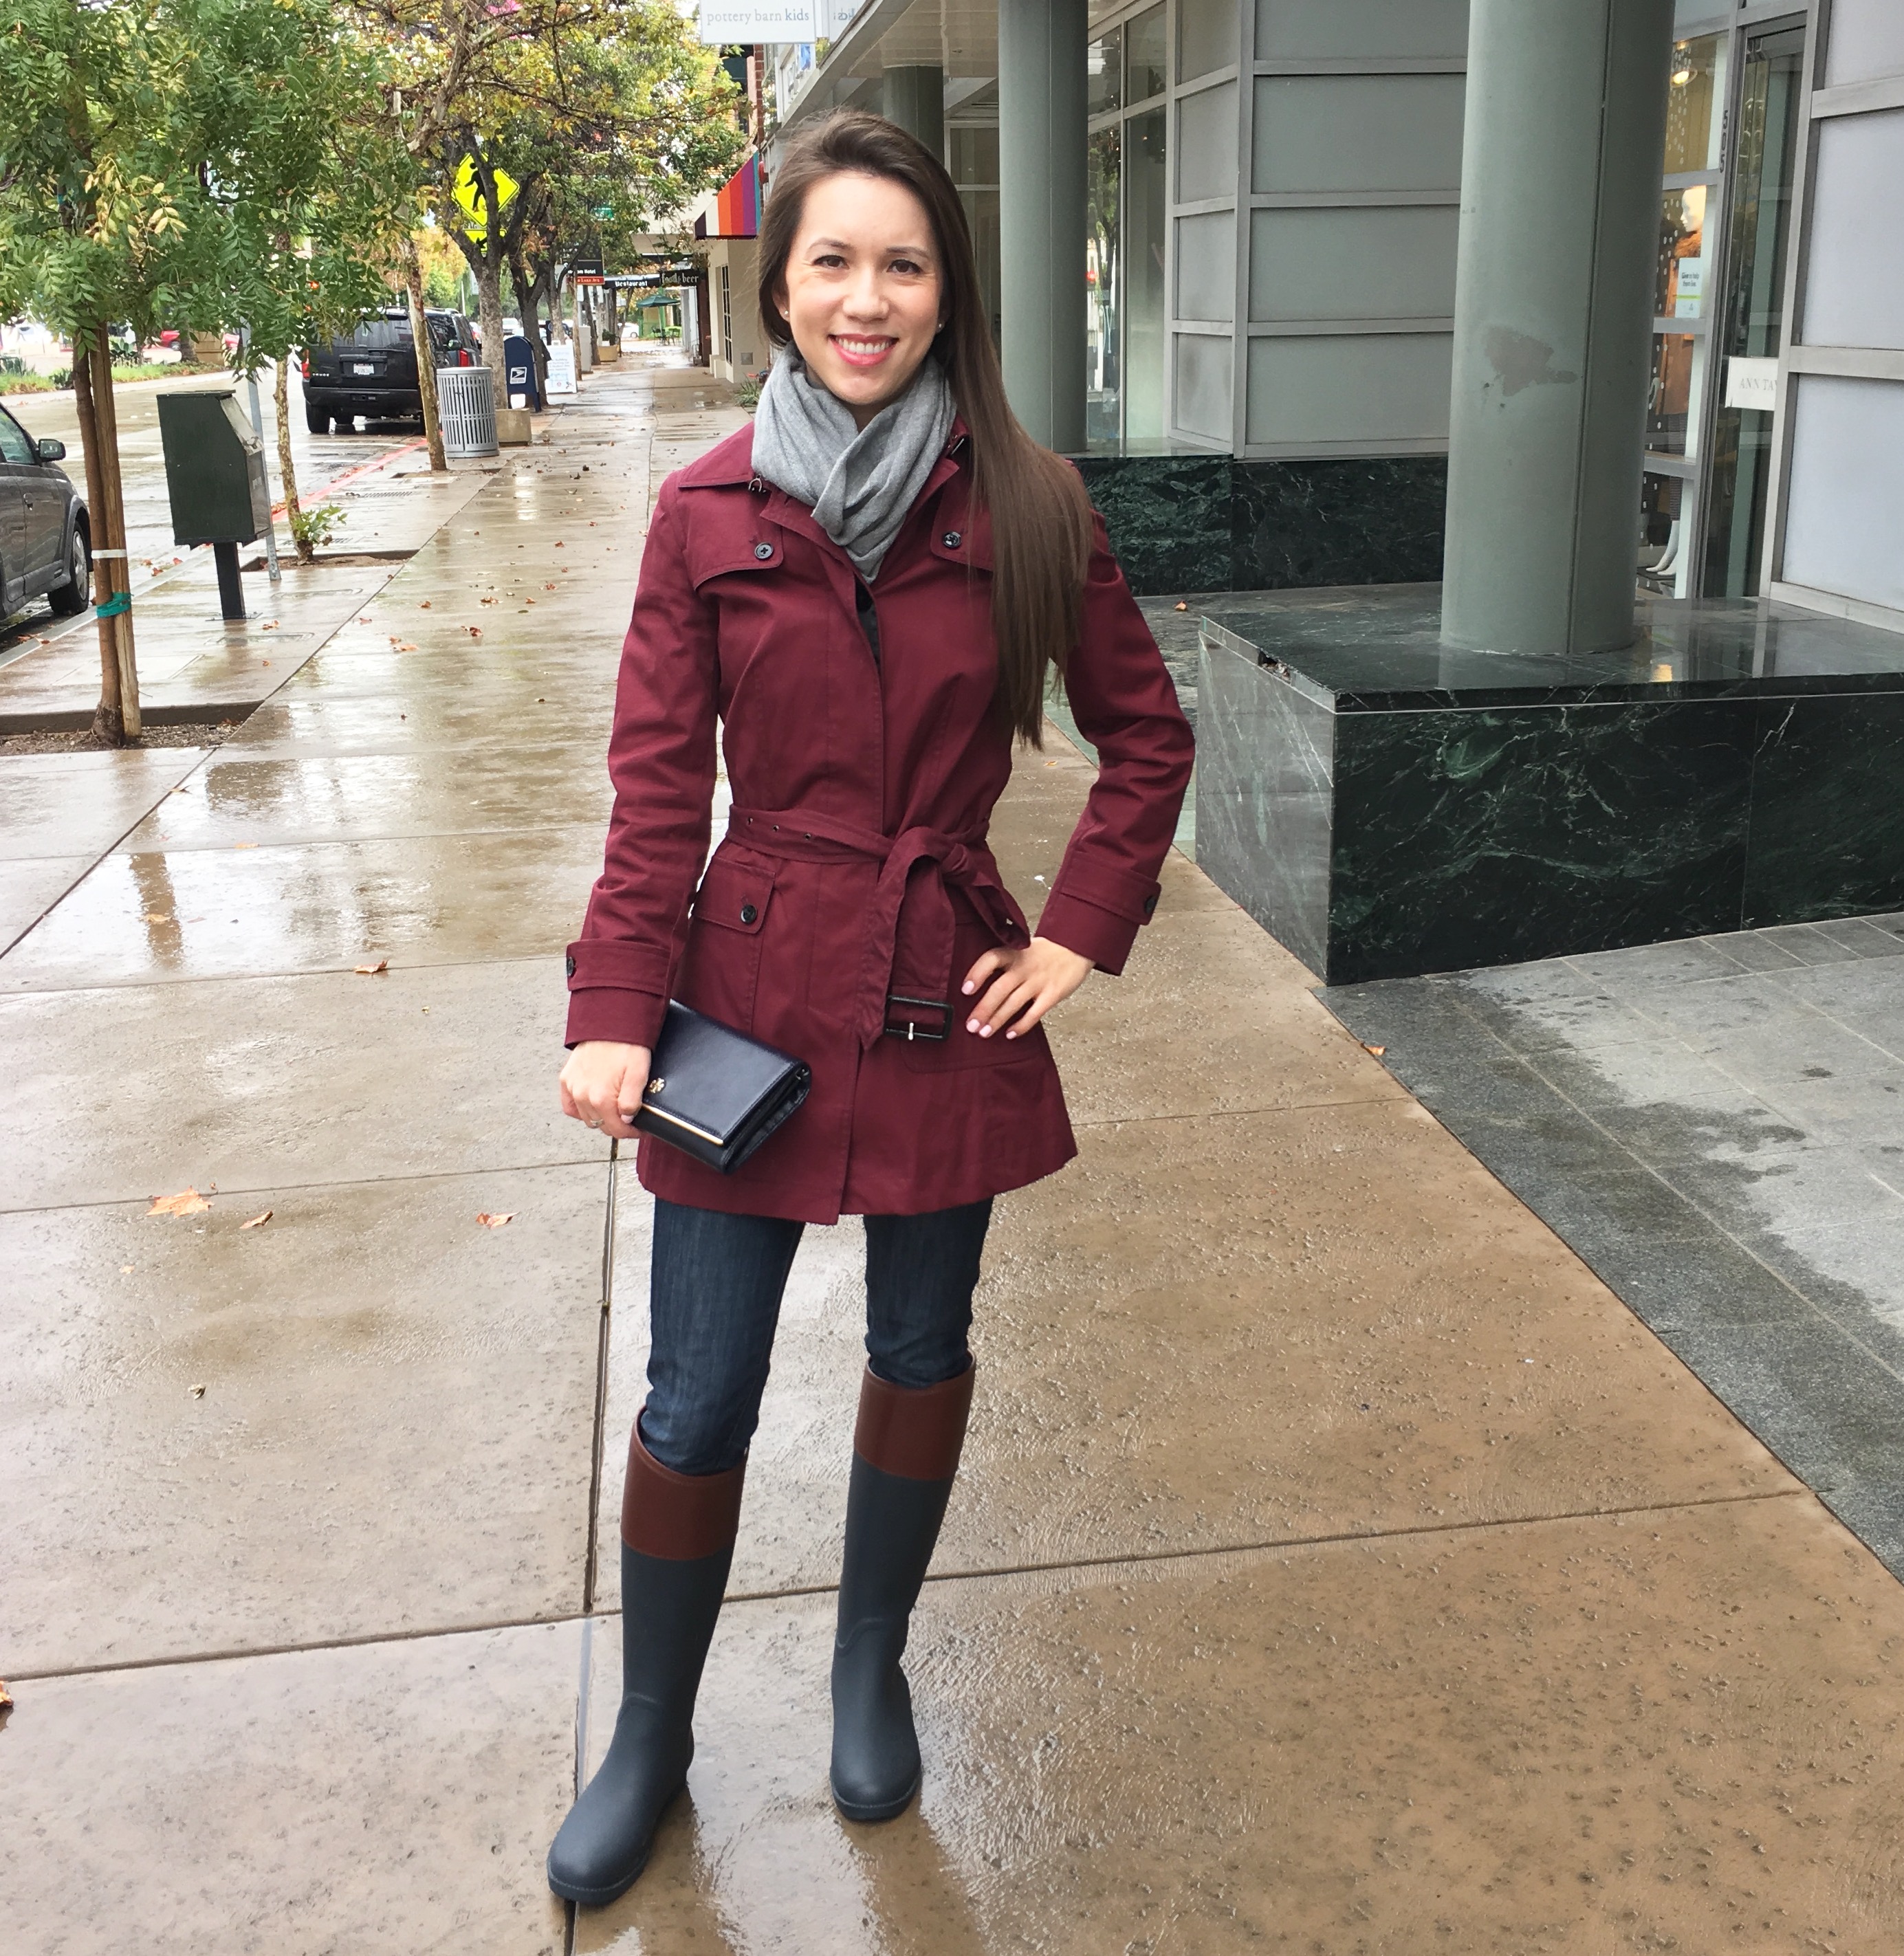 3 Must Have Boots for Fall | Fall boots, fall ankle booties, fall rain boots, Tory Burch rain boots, Aquatalia waterproof black boots brown boots, Hunter rain boots, Vince Camuto Franell, Sheec socks, Fall season, Petite fashion & style blog